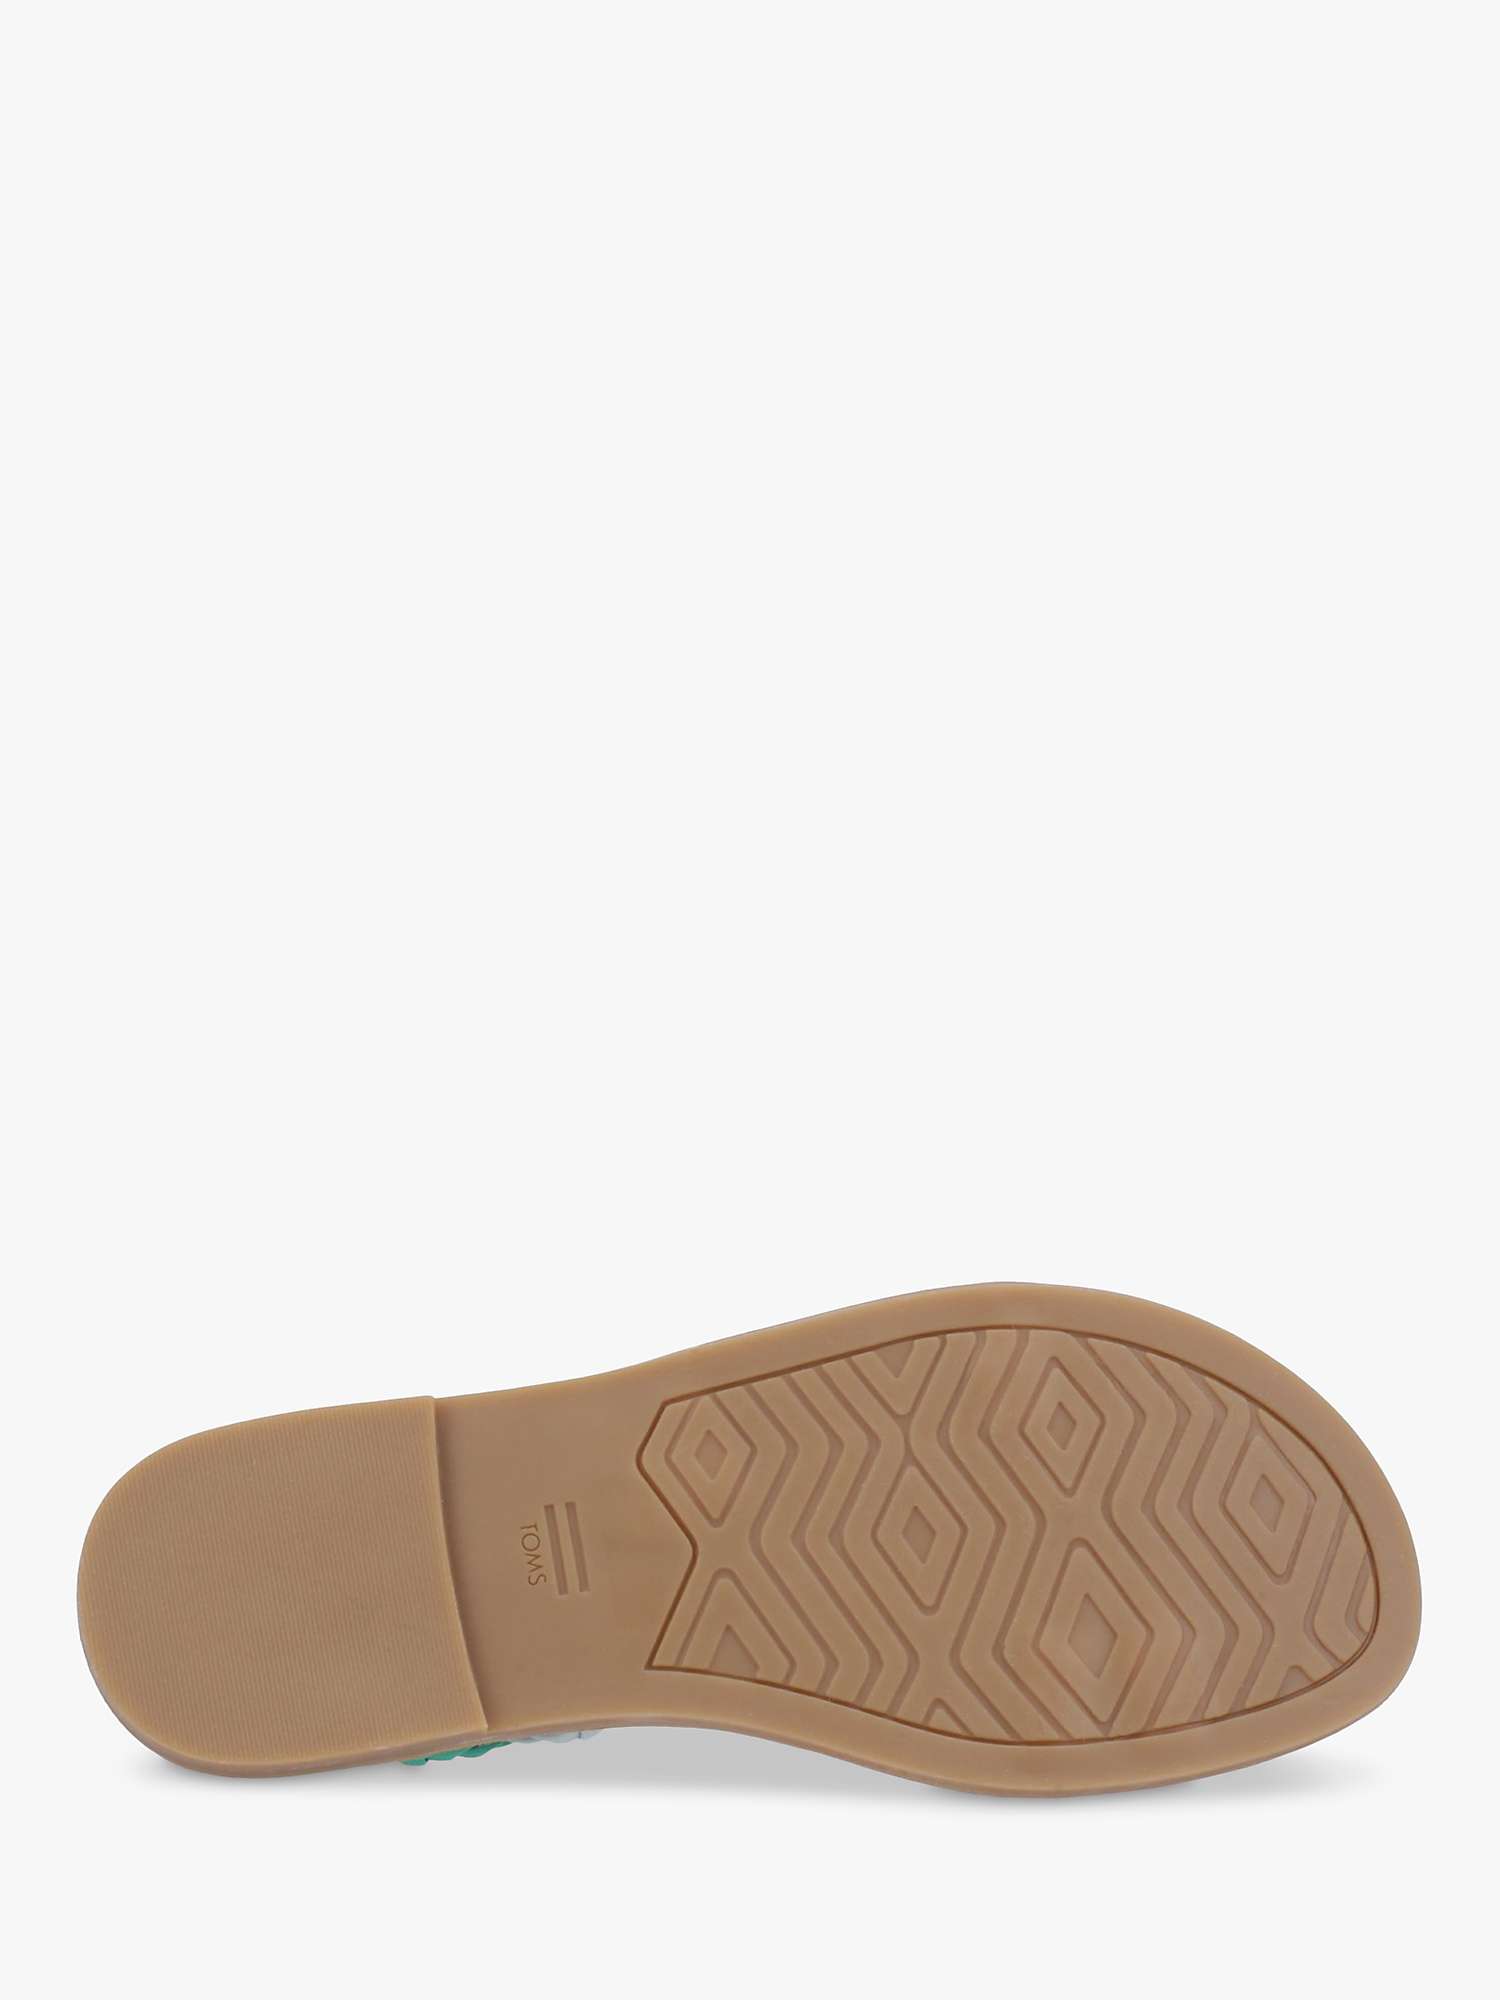 Buy TOMS Kira Strappy Sandals, Multicoloured Online at johnlewis.com